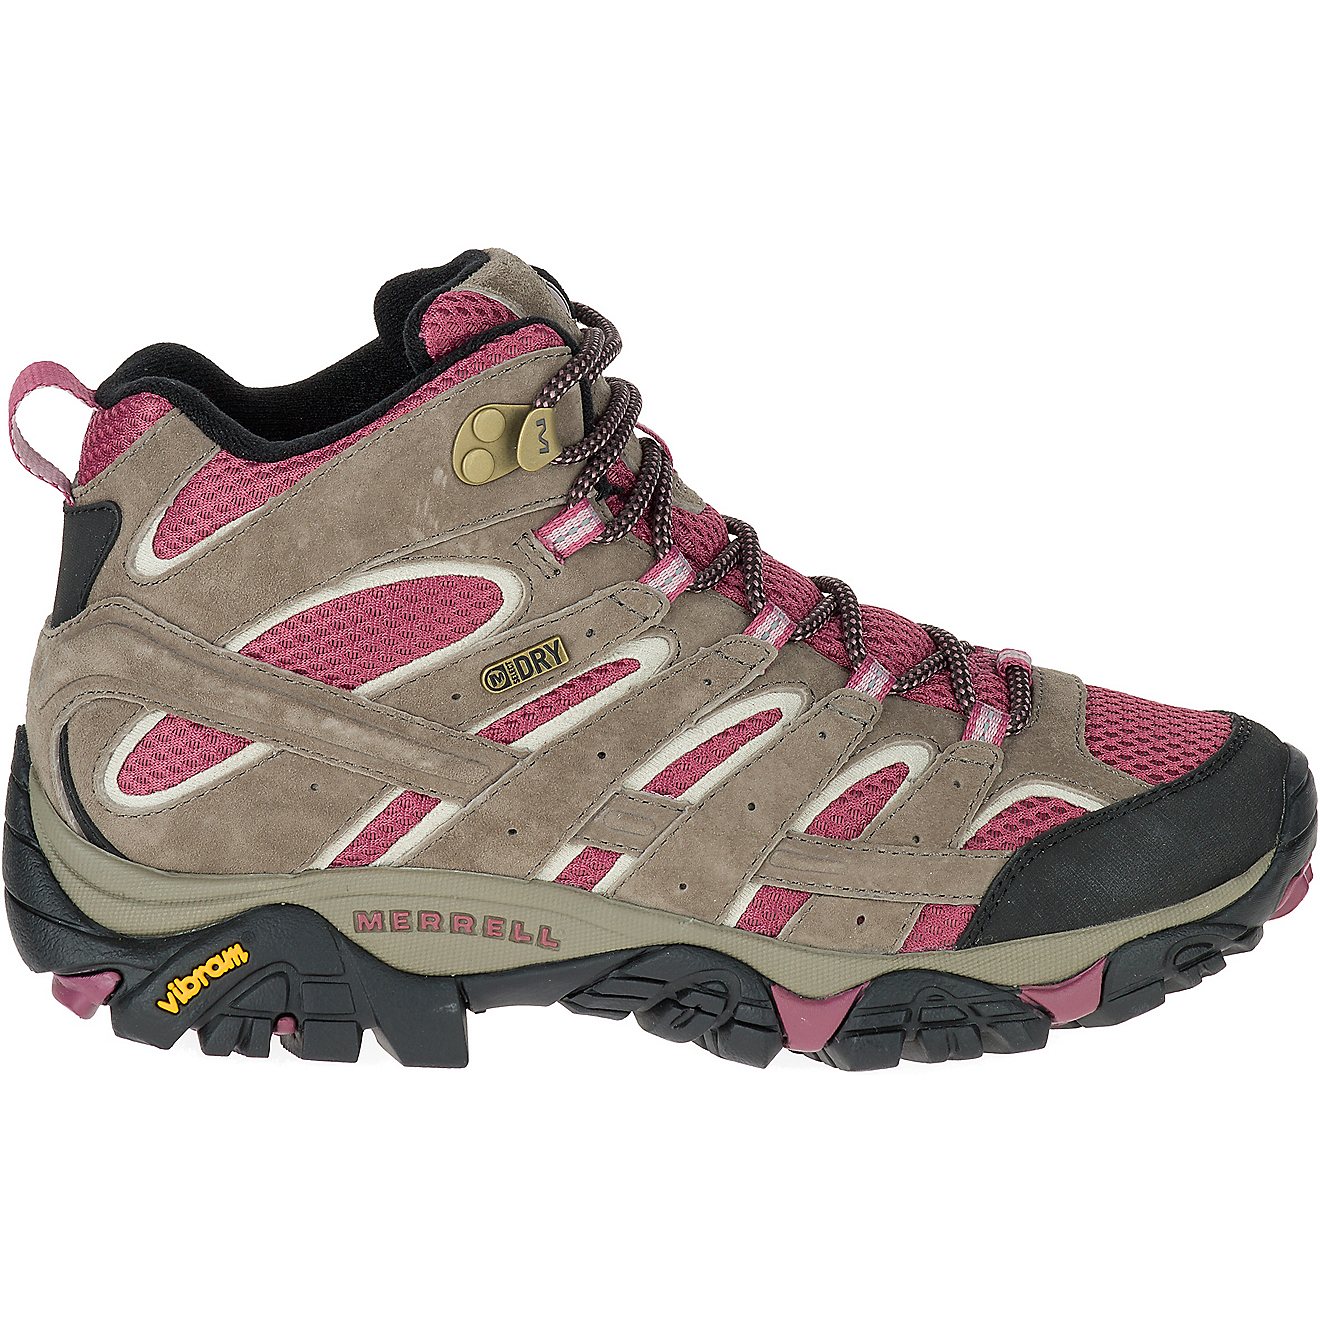 Windswept Learner Insister Merrell Women's Moab 2 Mid Waterproof Hiking Shoes | Academy